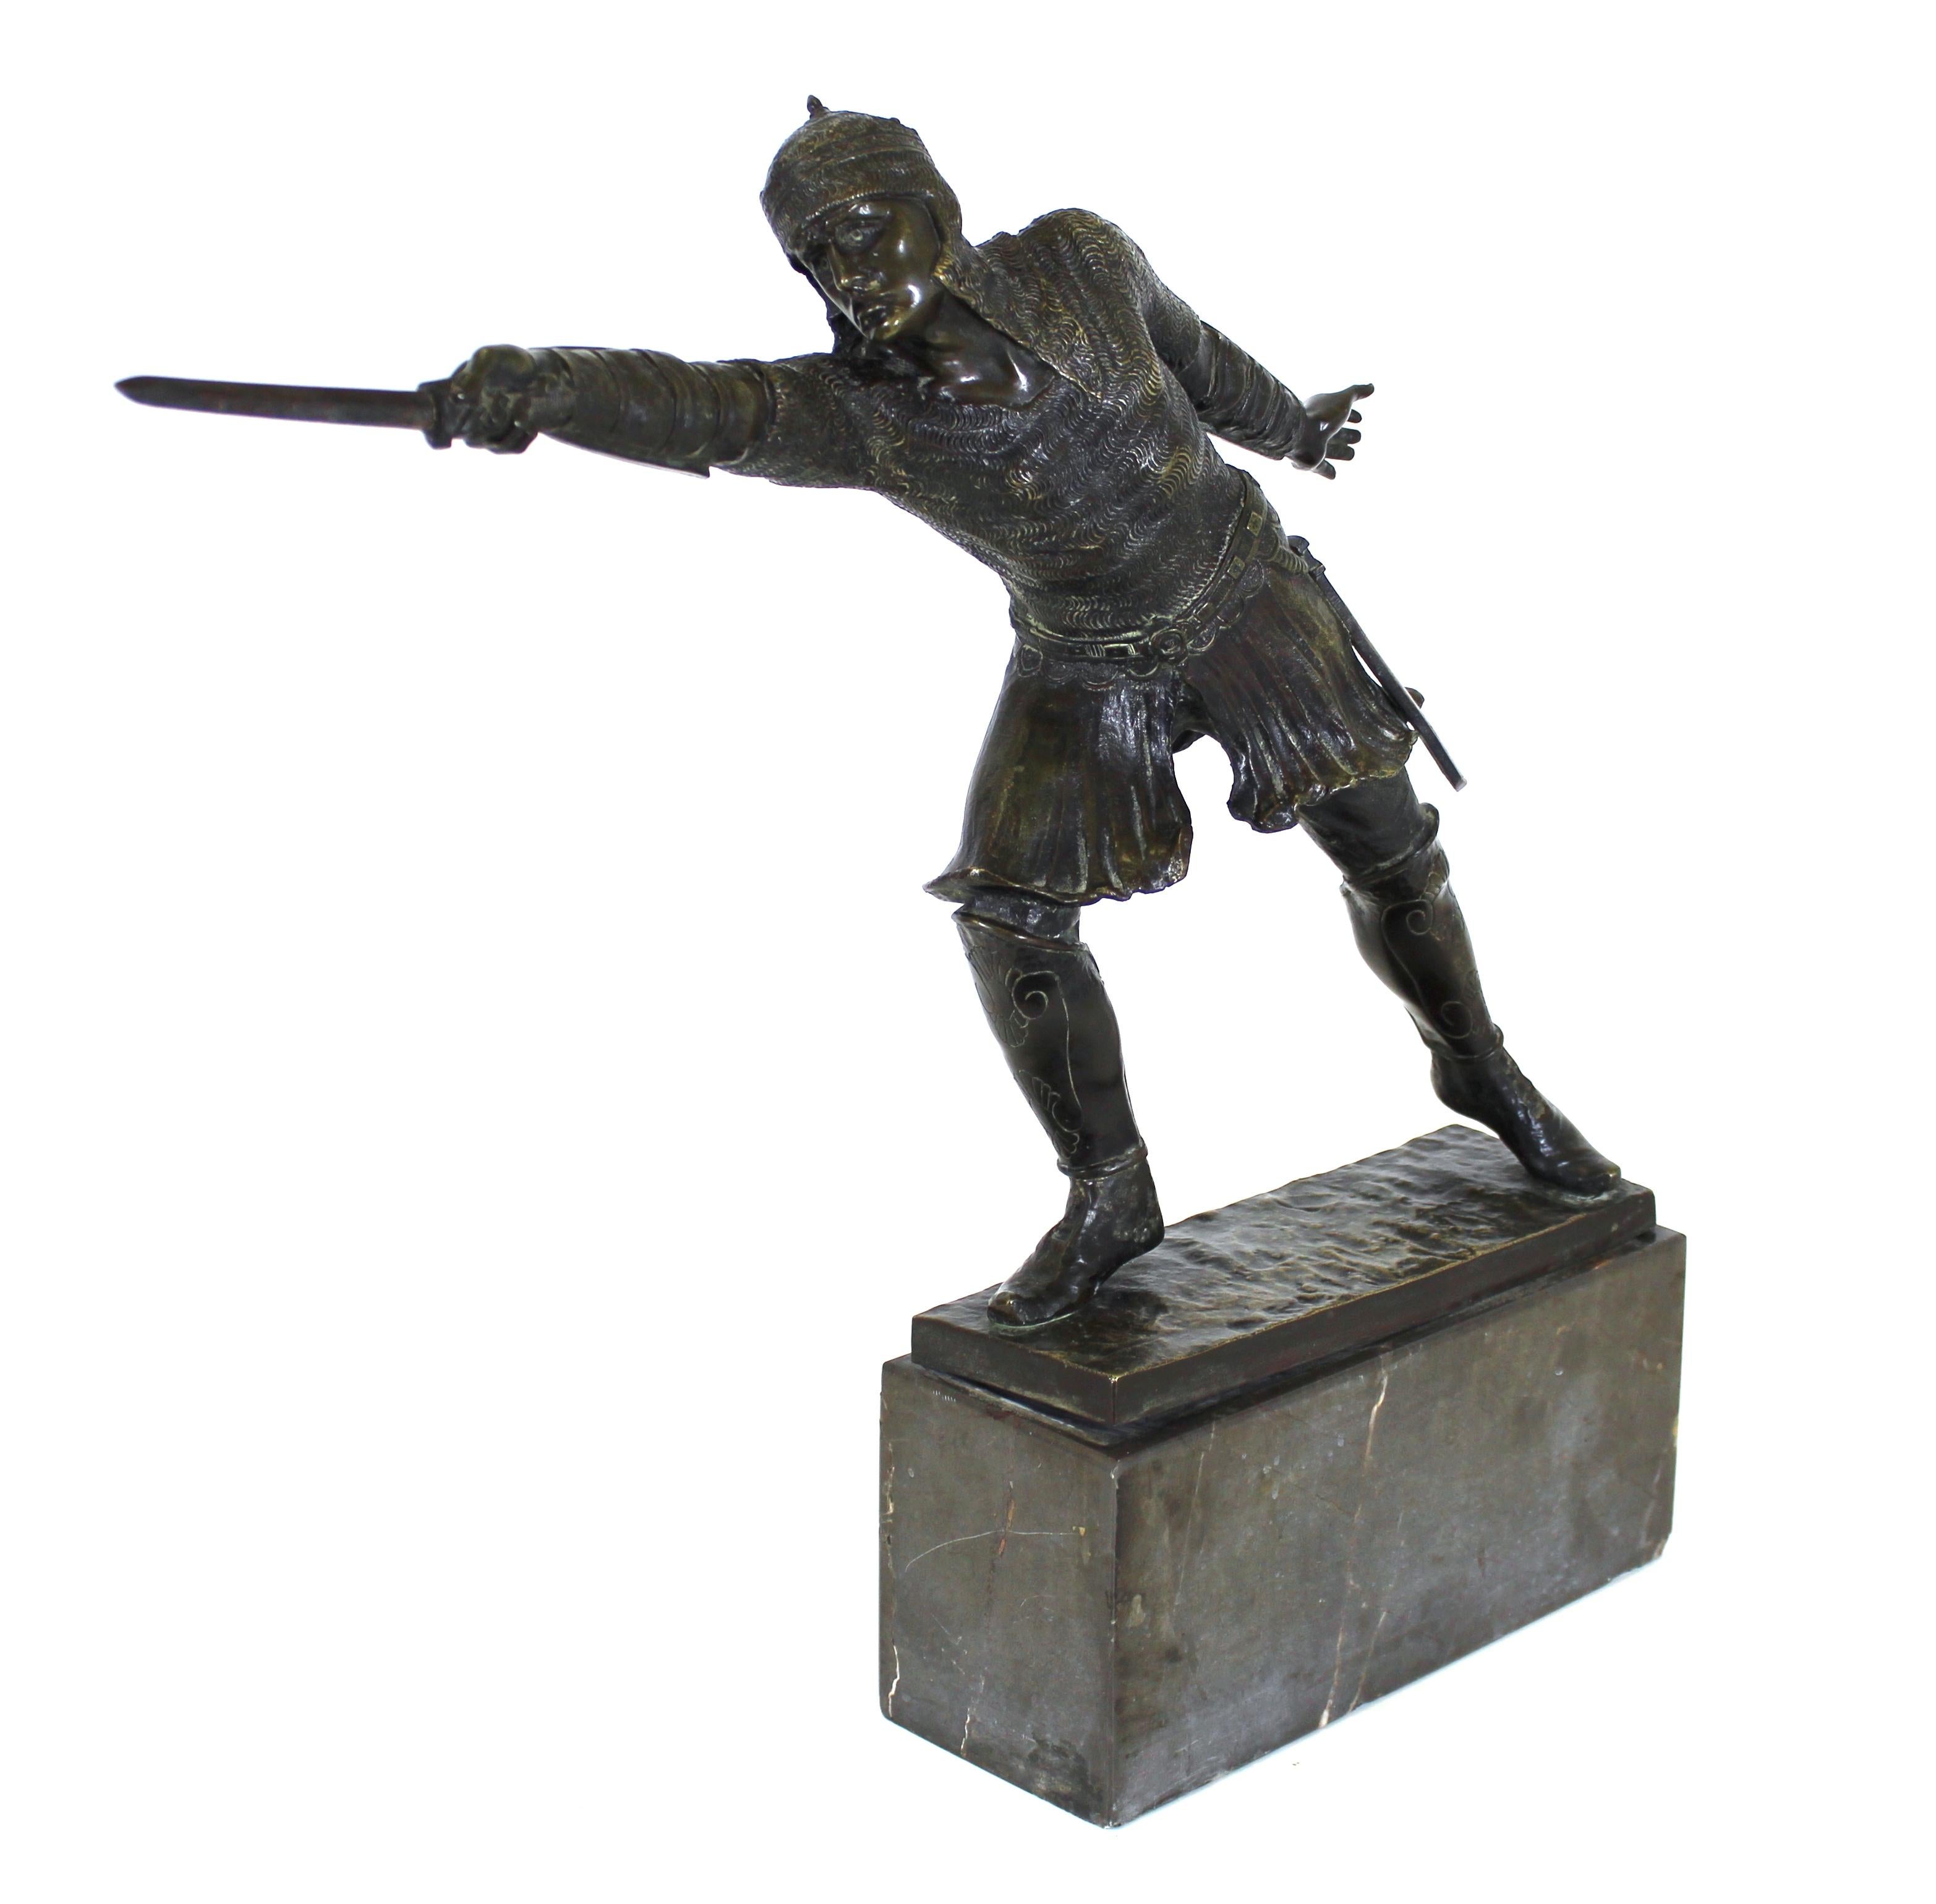 Rudolf Kuchler Austrian Medieval Revival bronze sculpture of a charging Teutonic knight, mounted on a marble base. Foundry mark on the back of the bronze base. Kuchler was a renown artist who worked in Berlin in the 1880s.
Minor chips to the